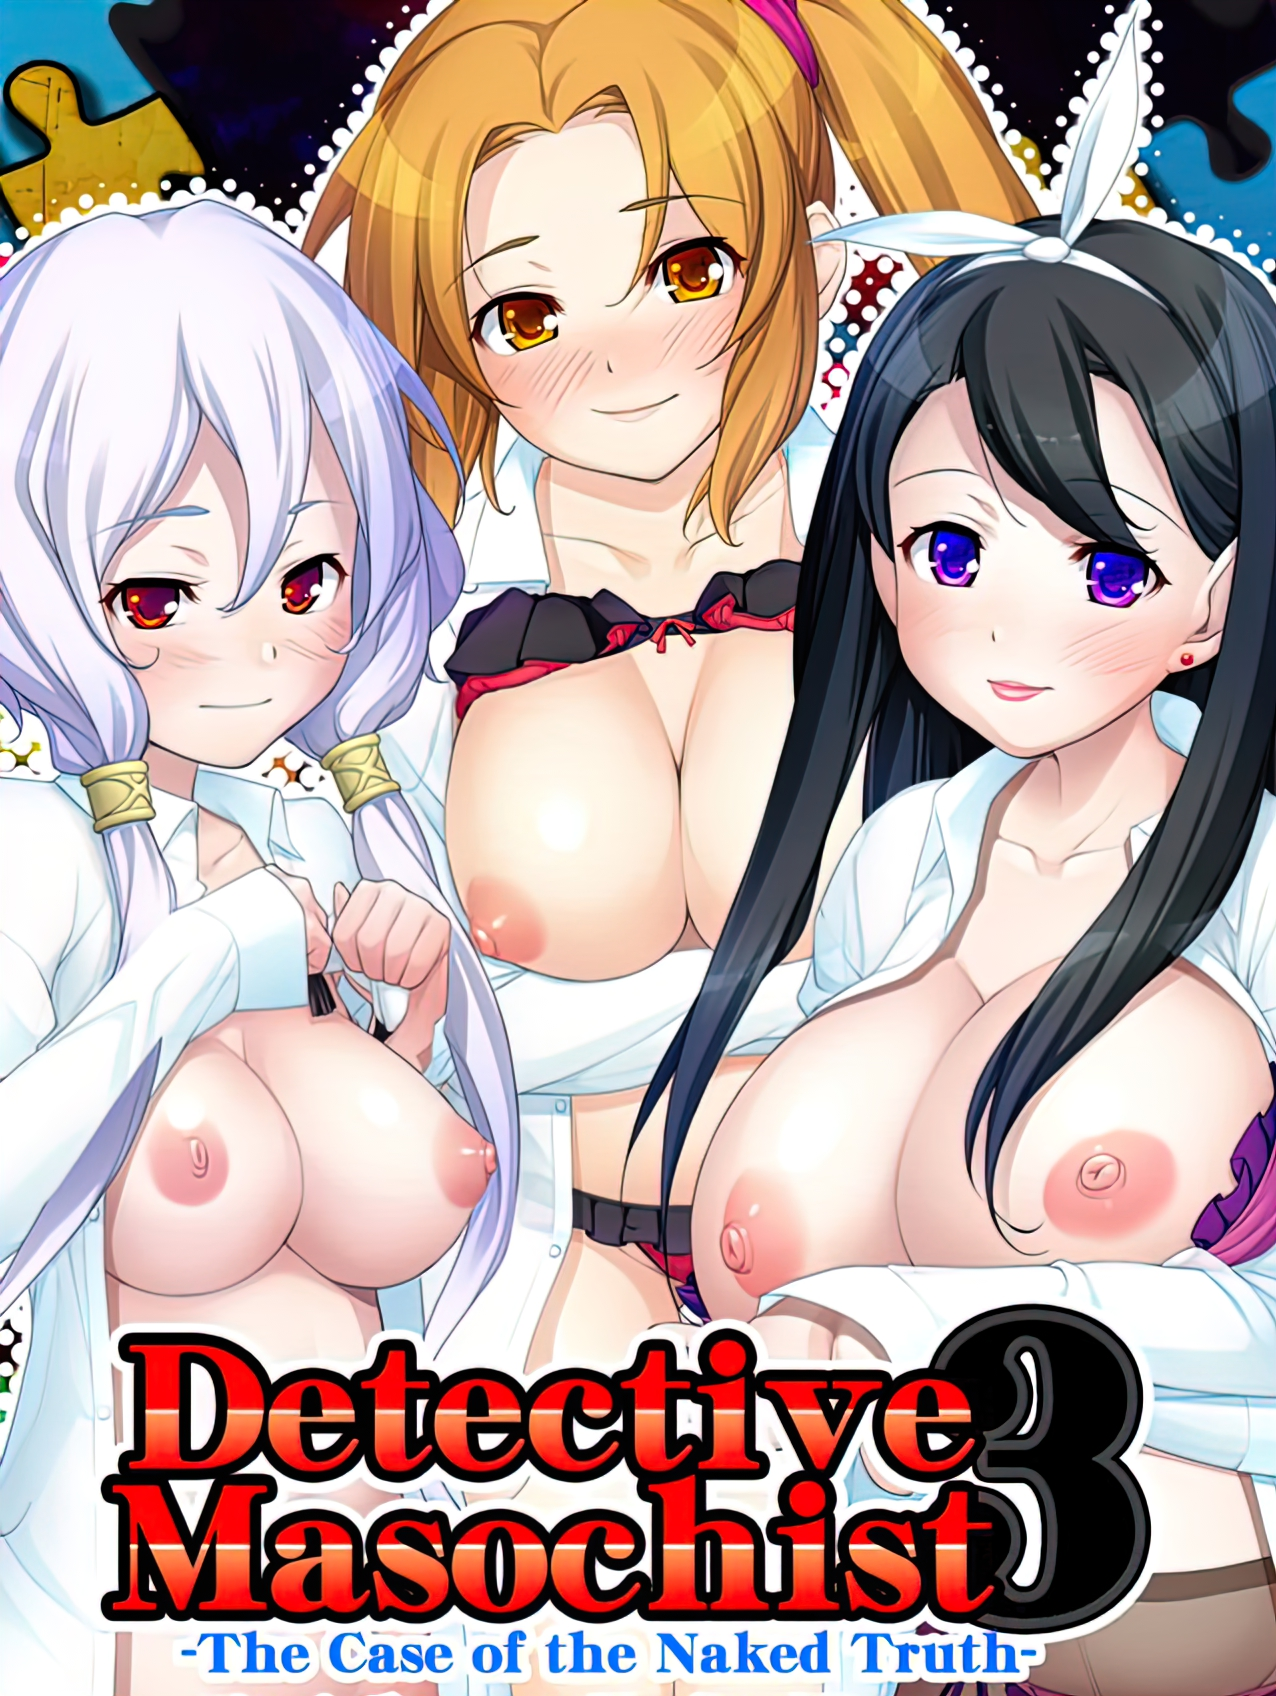 Detective Masochist 3 -The Case of the Naked Truth- main image